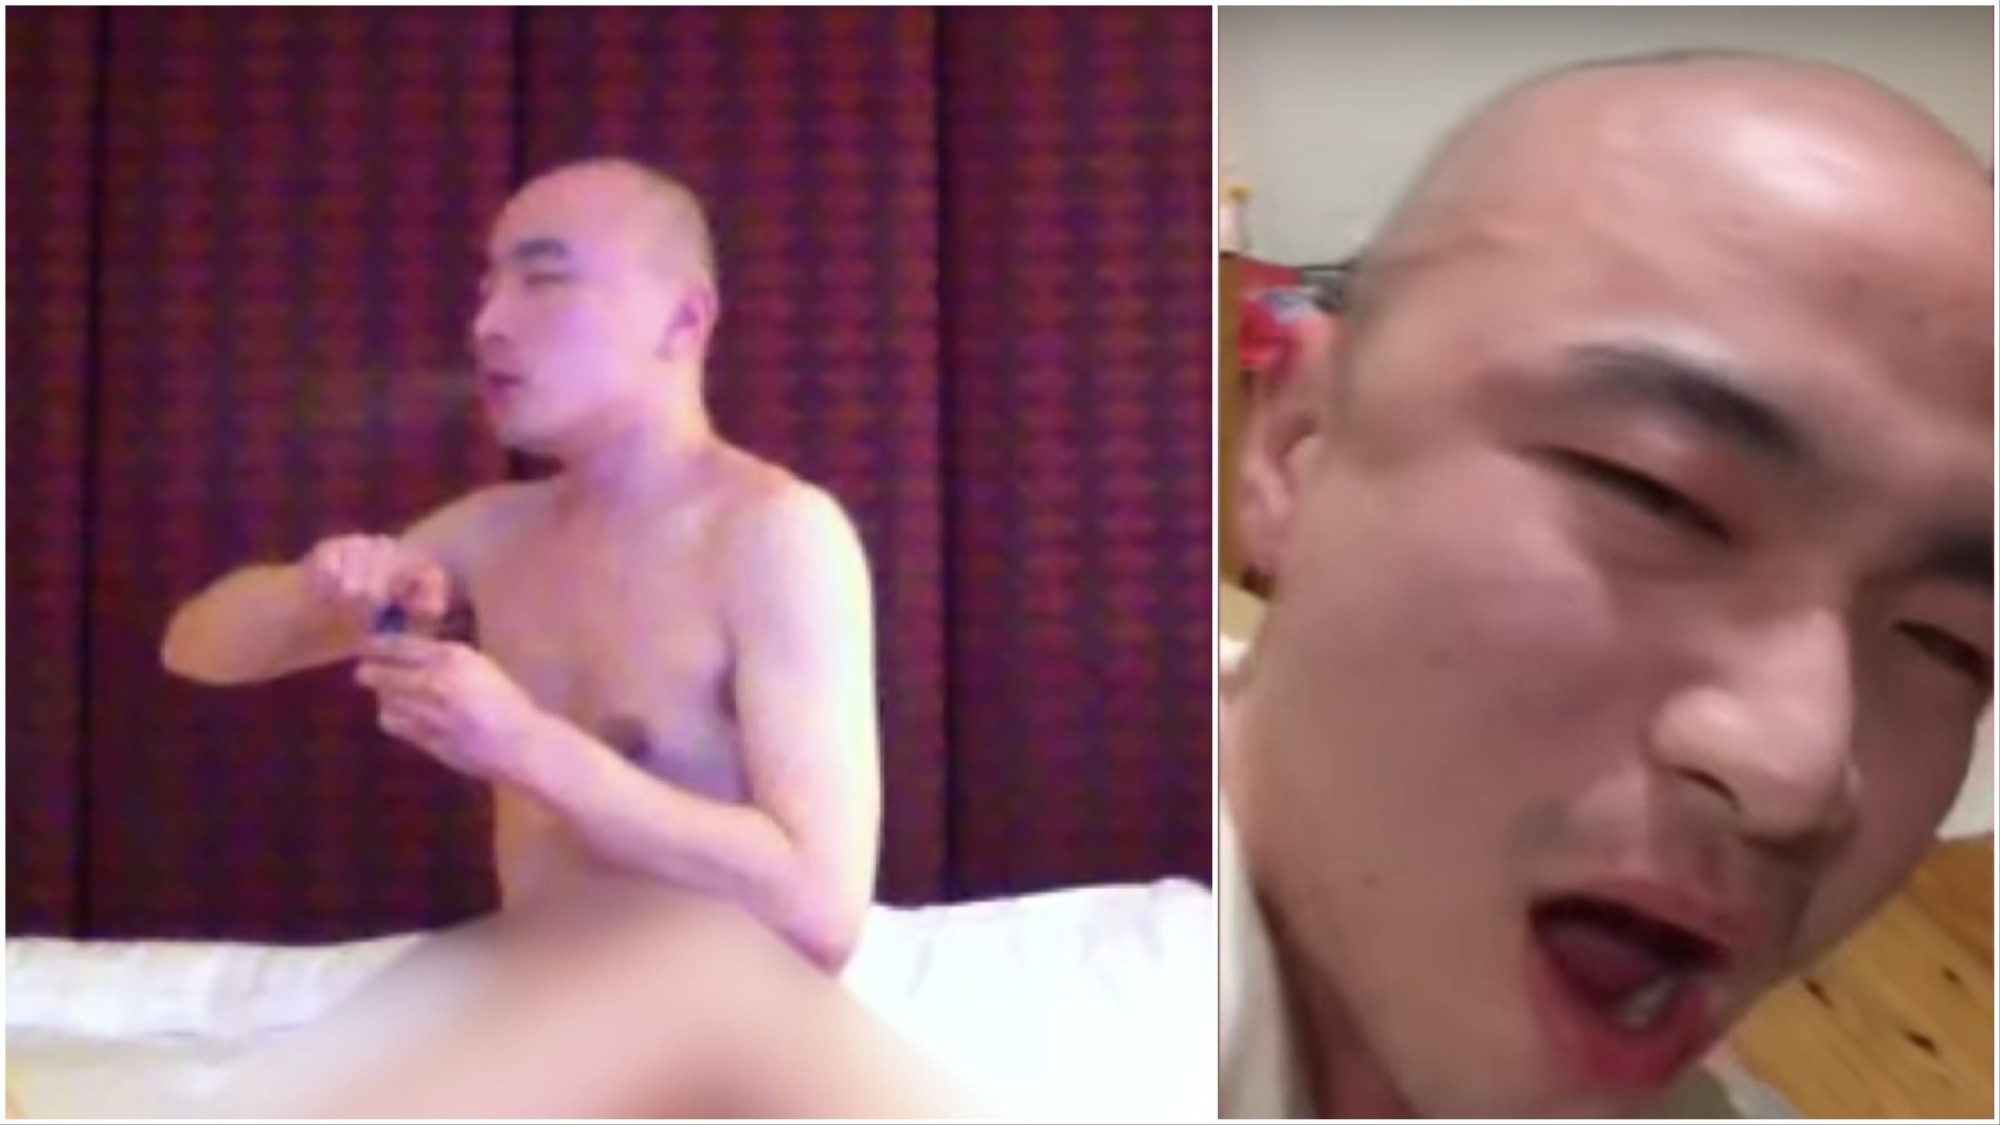 Meth Smoker Porn - A Buddhist Monk Was Arrested for Having Chemsex Parties in ...